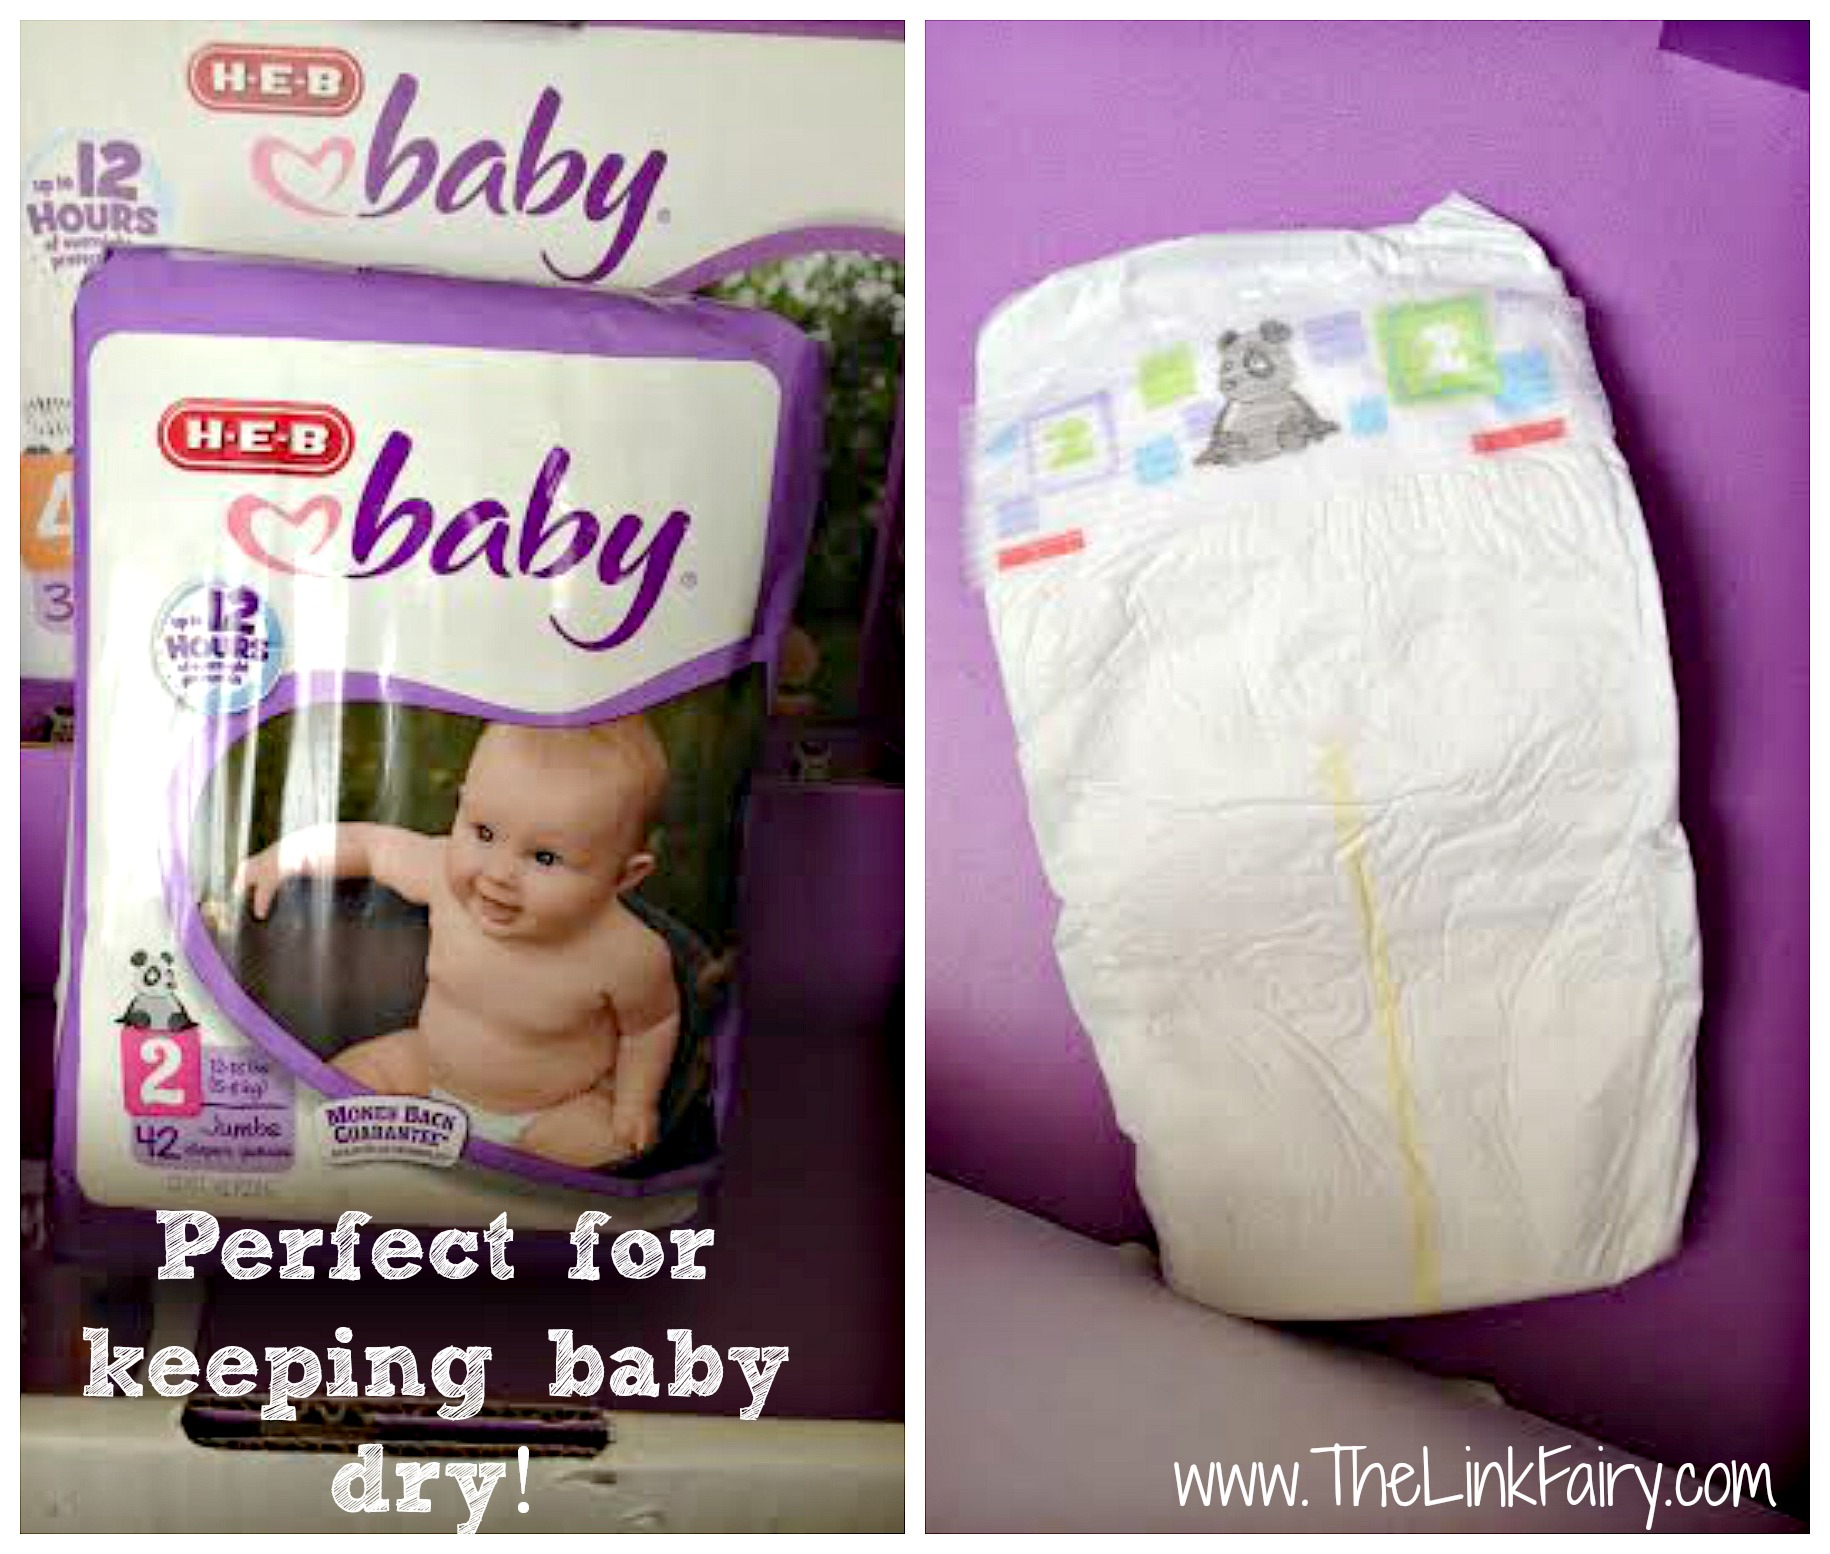 HEB Baby Diapers